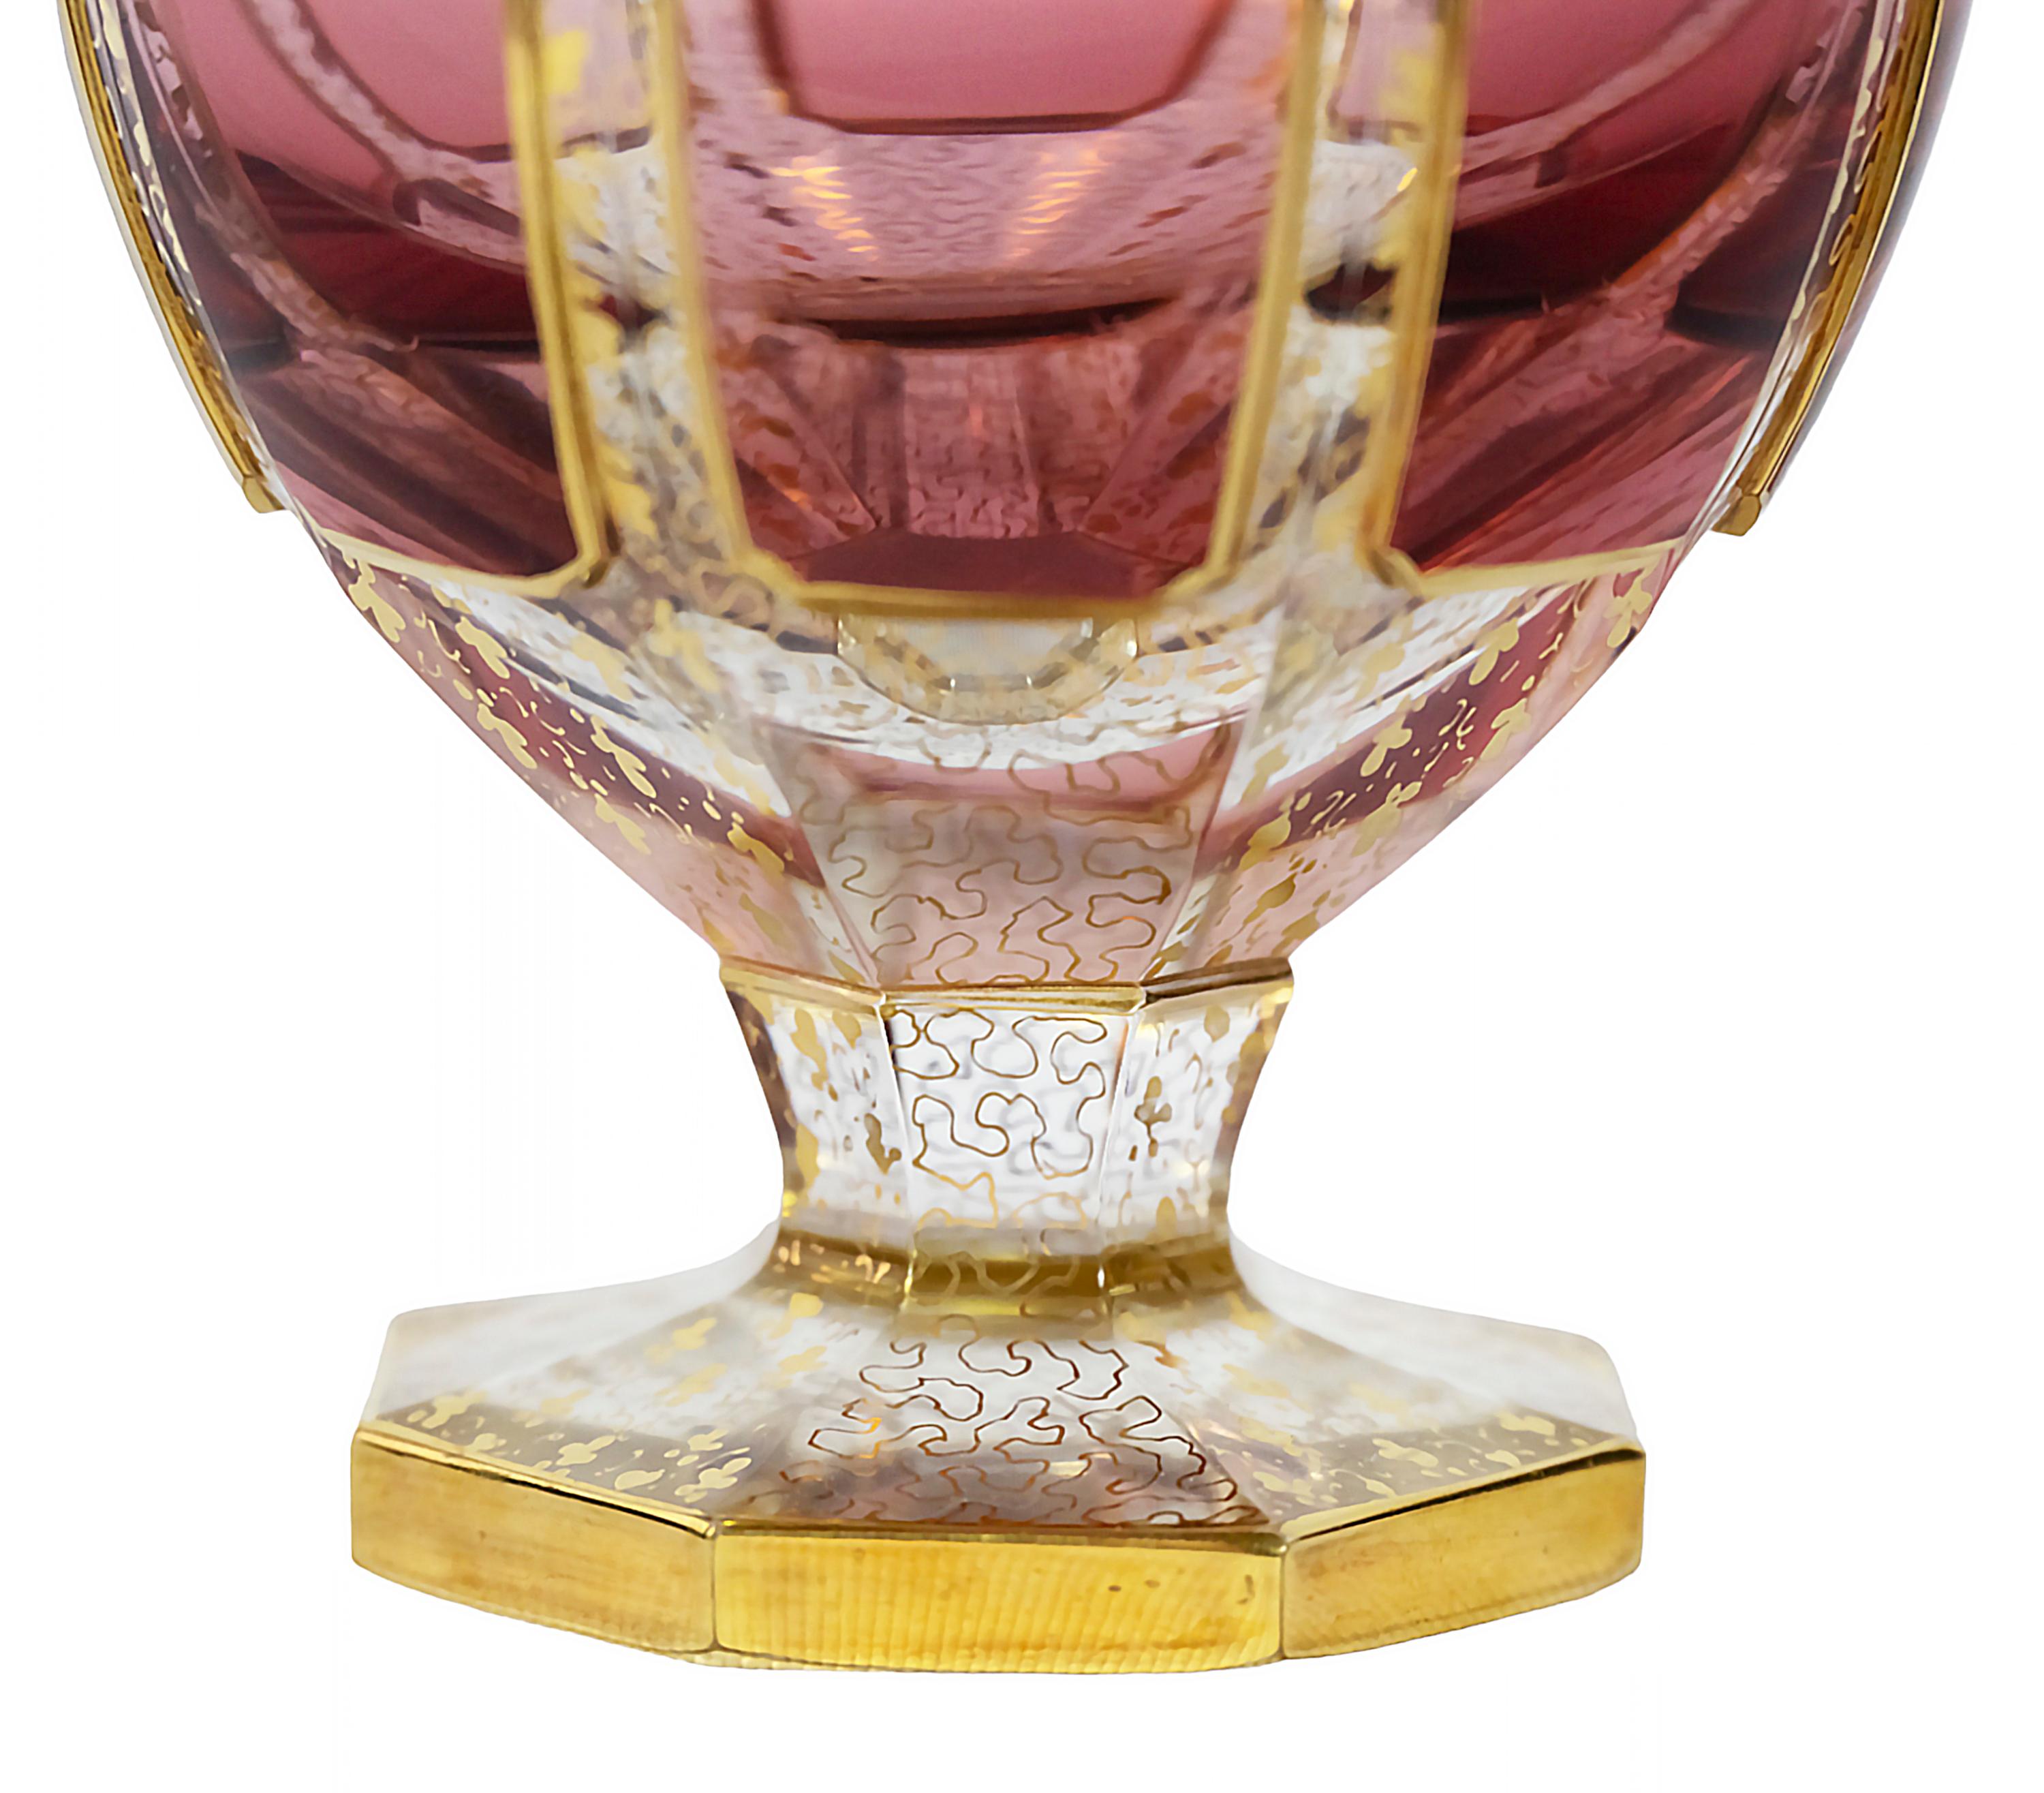 Bohemian Handmade Moser Roemer Lidded Gilt Glass Candy Dish/Box In Good Condition For Sale In Vilnius, LT